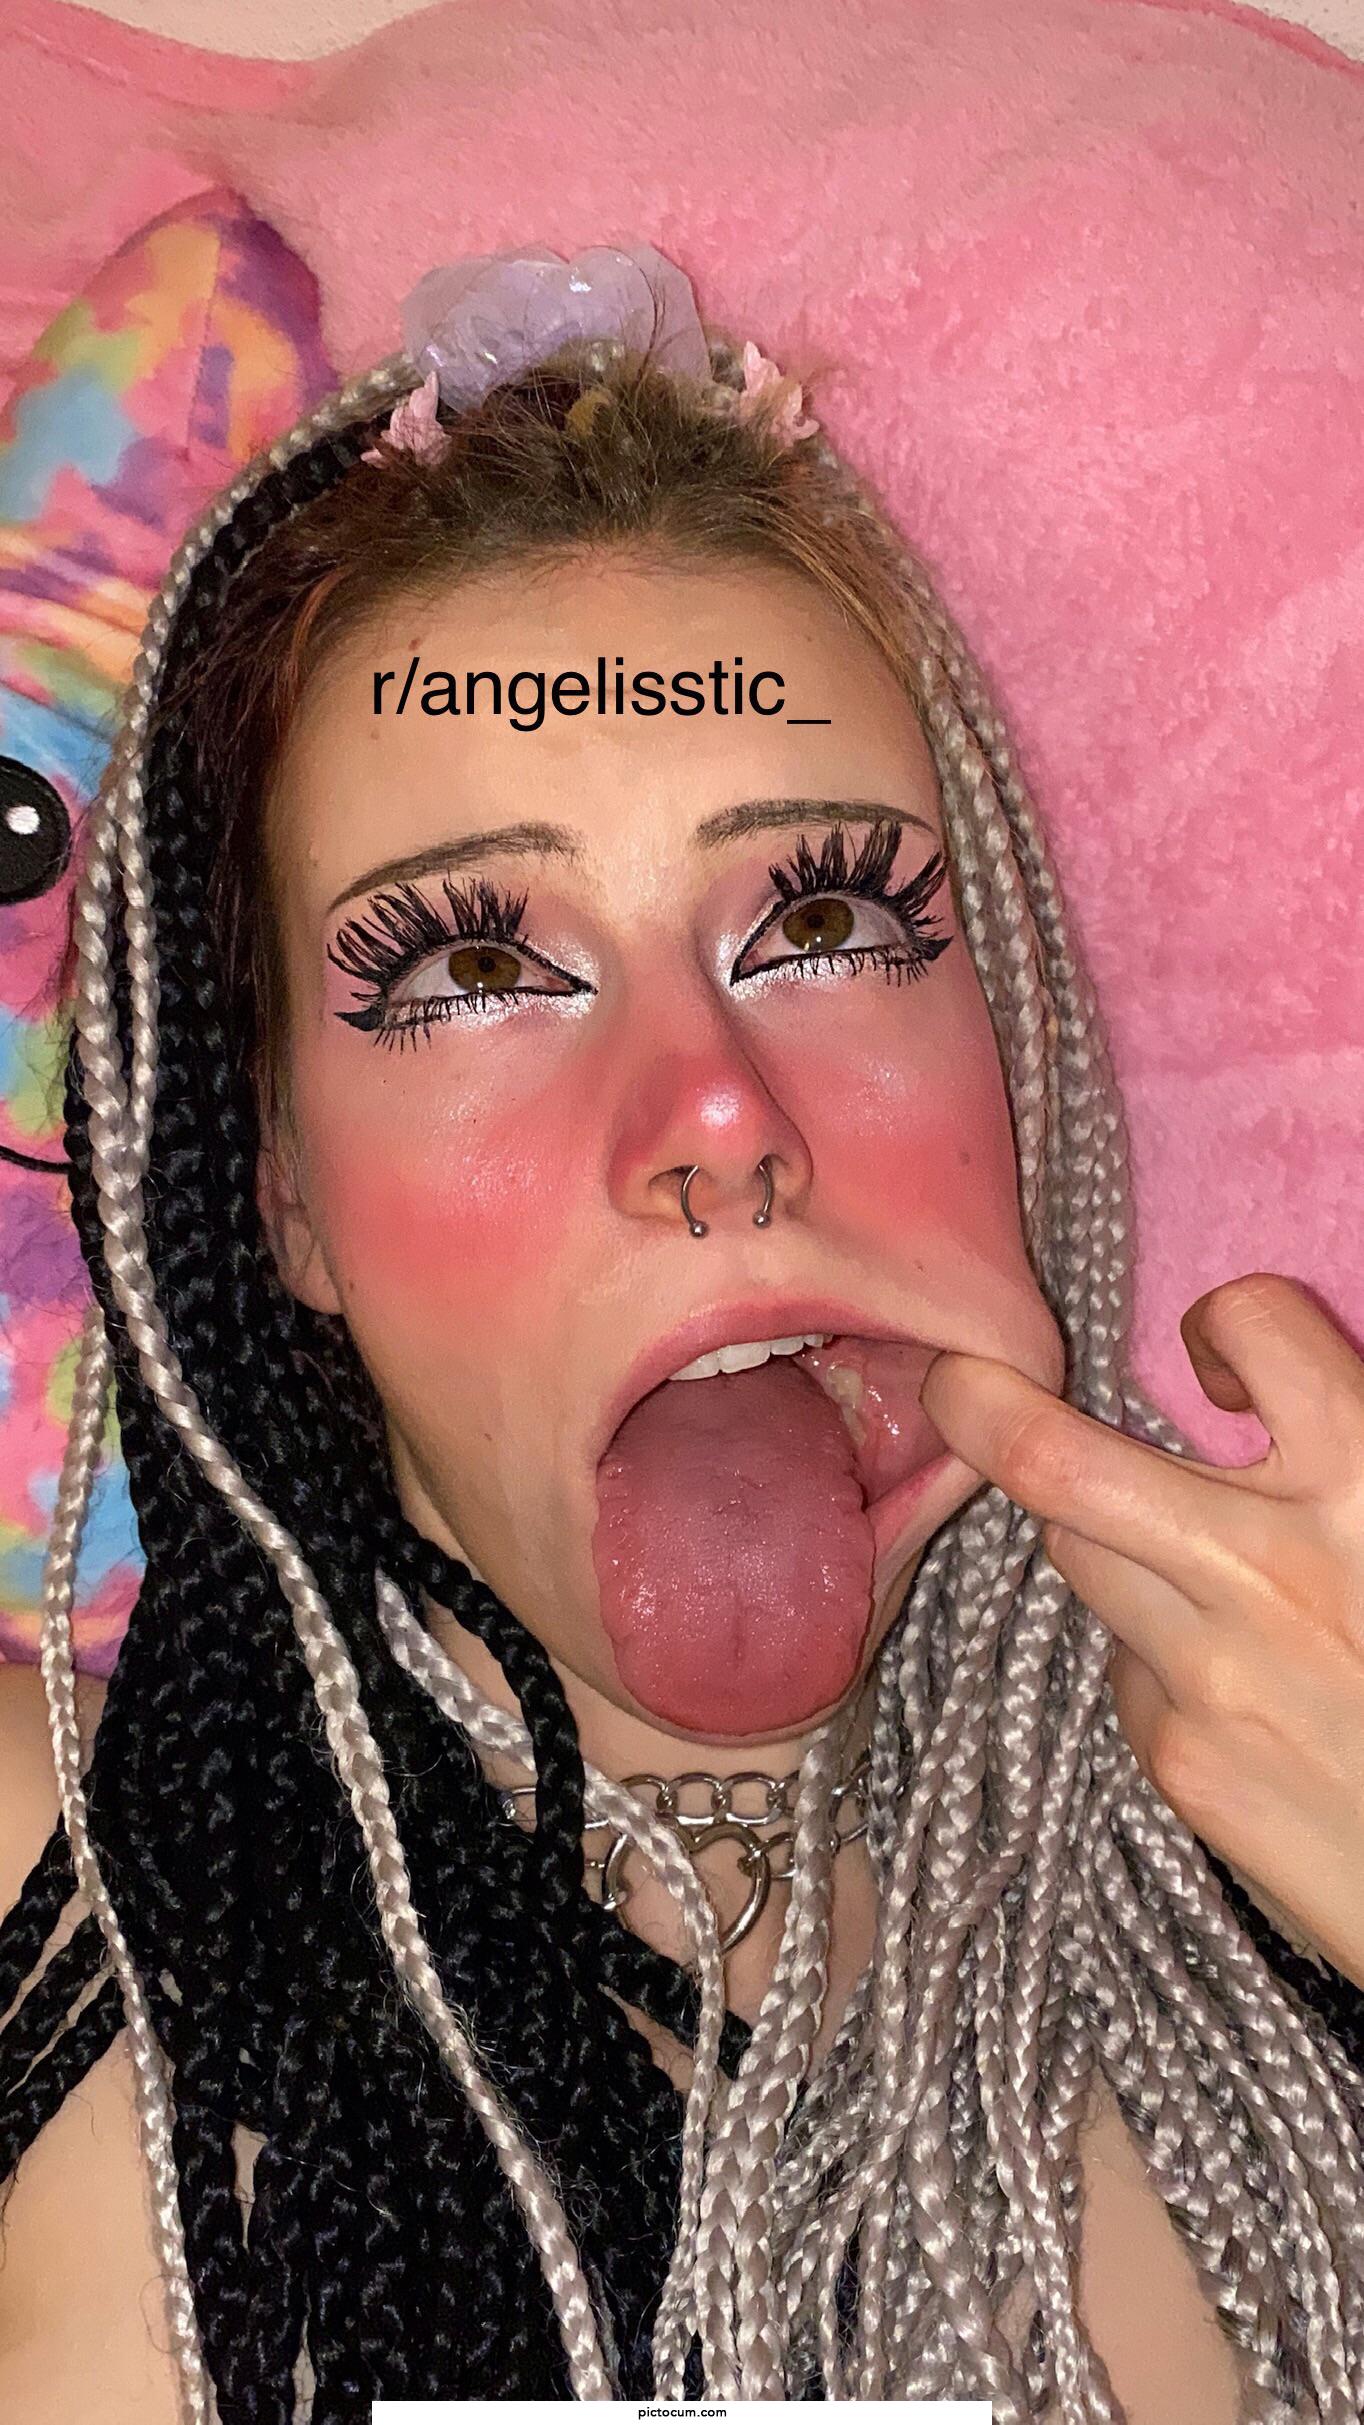 I got told this fish hook ahegao is the new trend… what do you think?